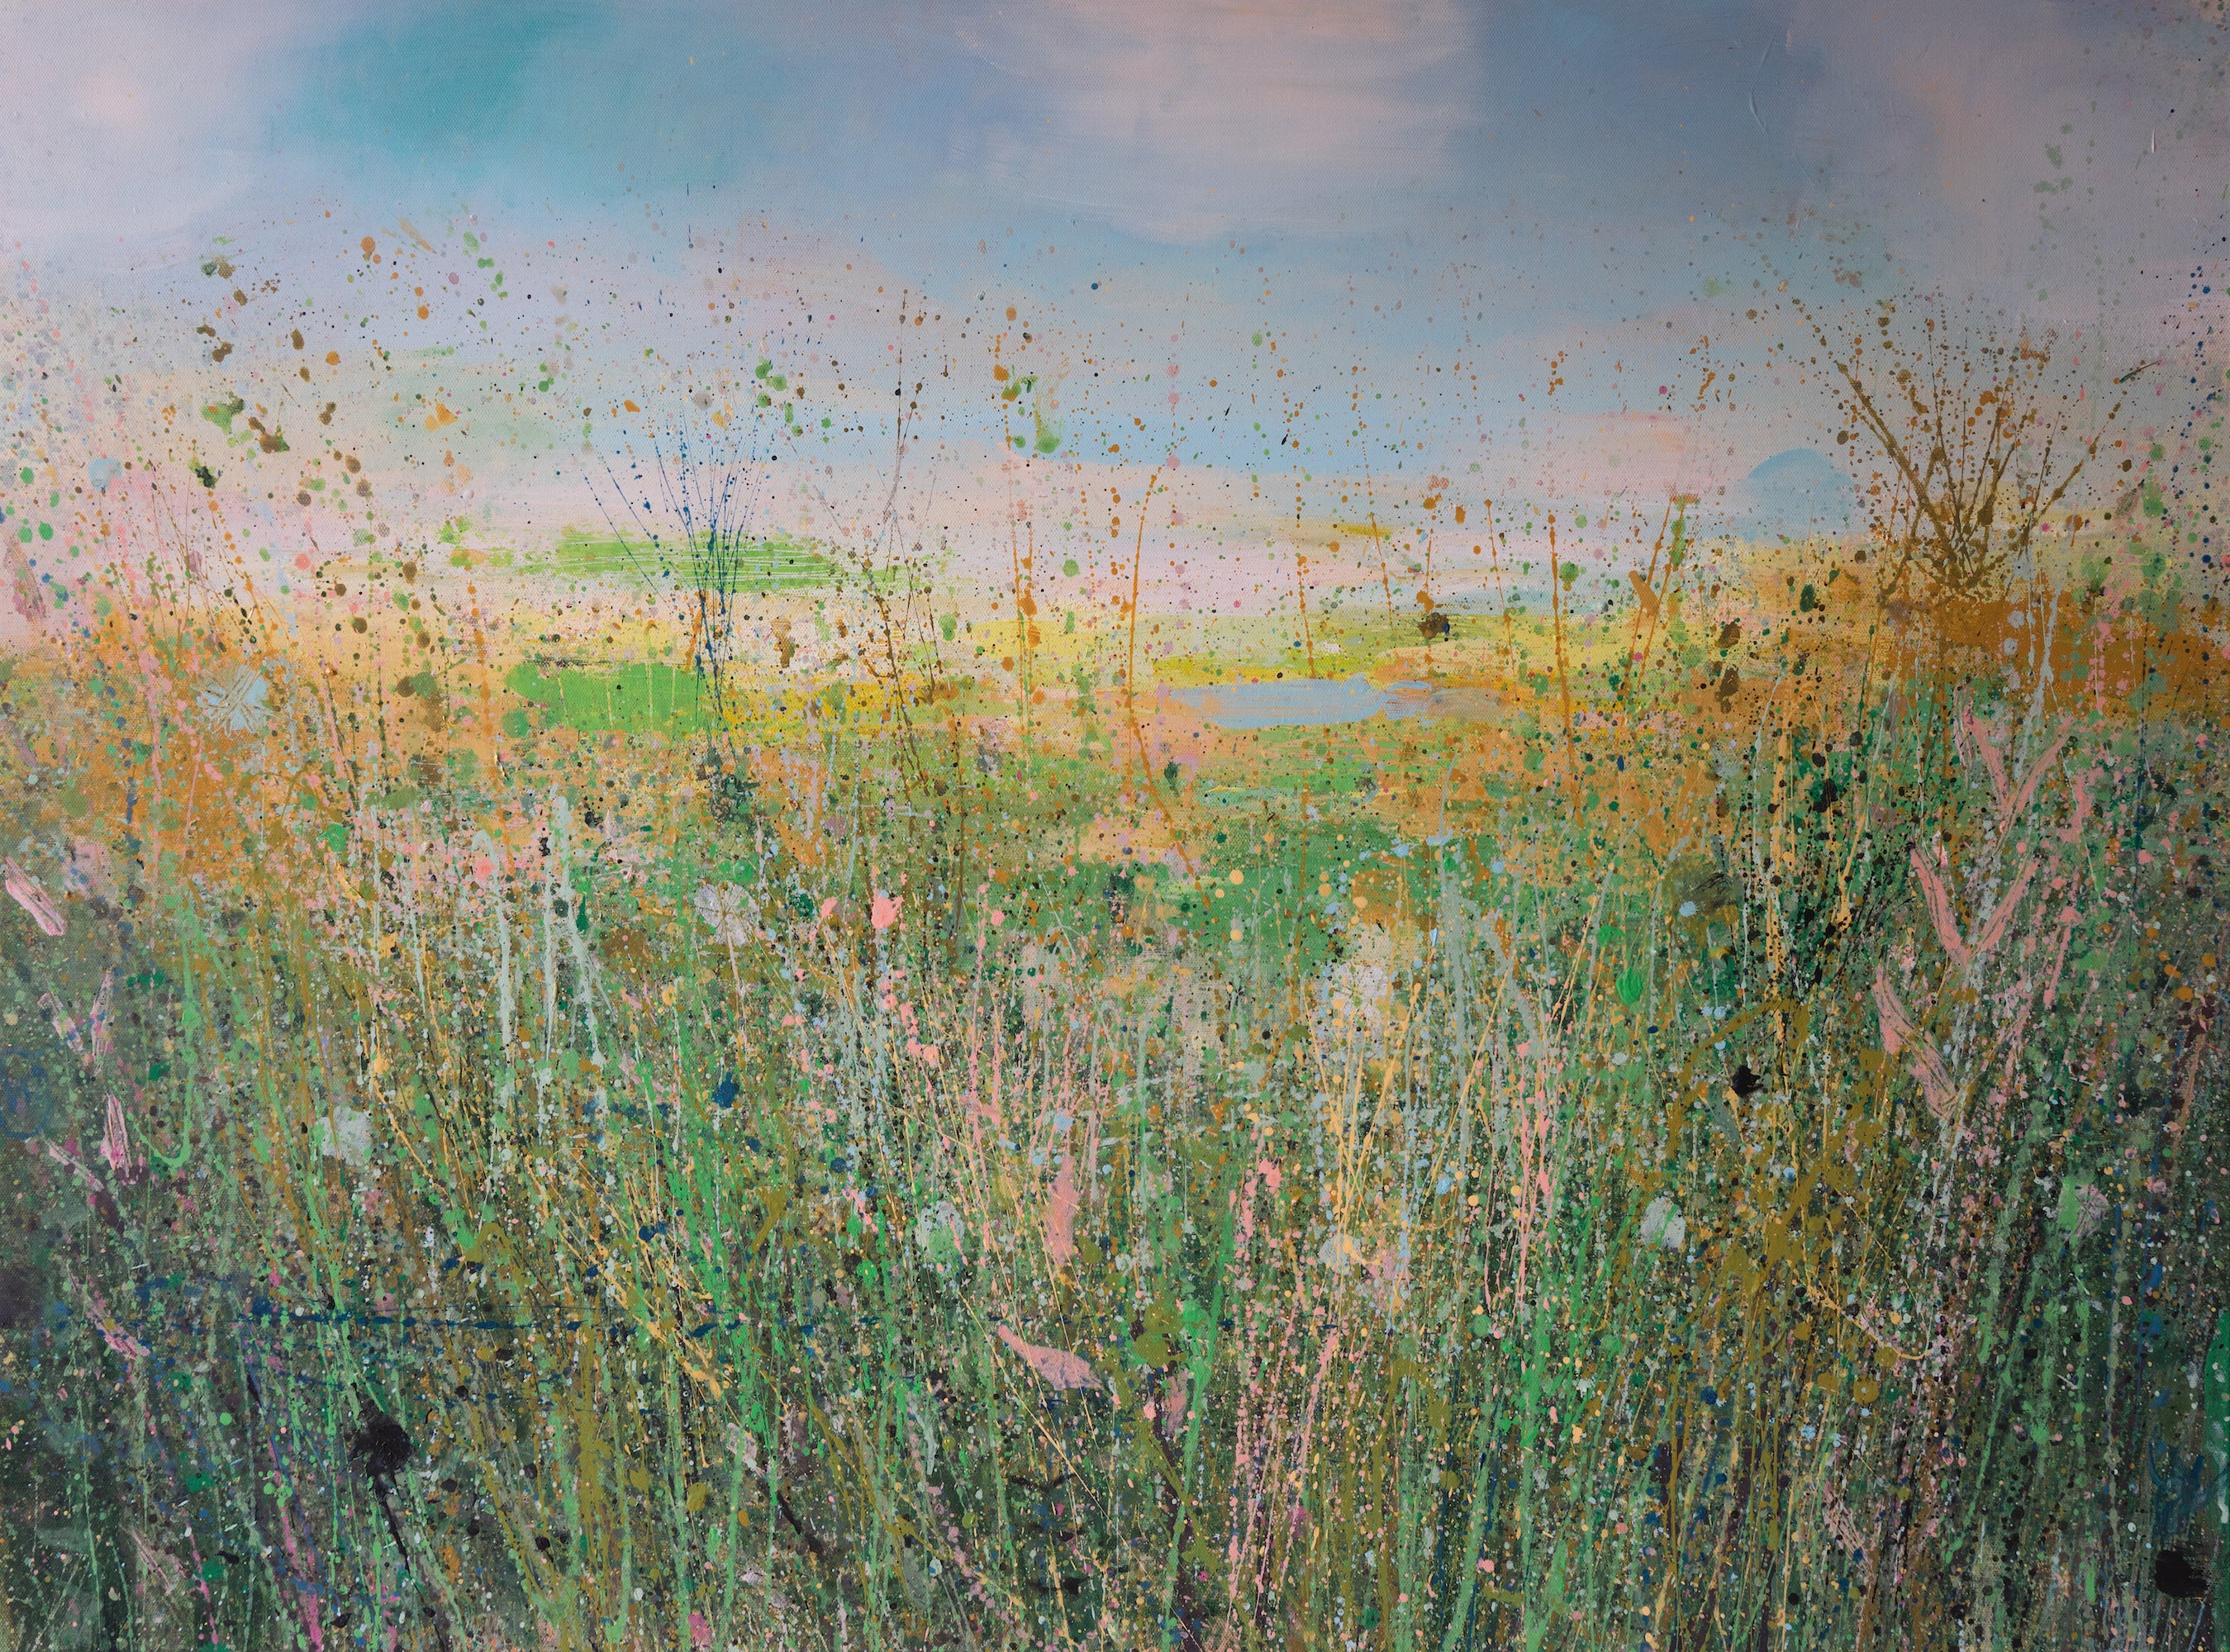 Edge of the Field, February Morning (on exhibition)